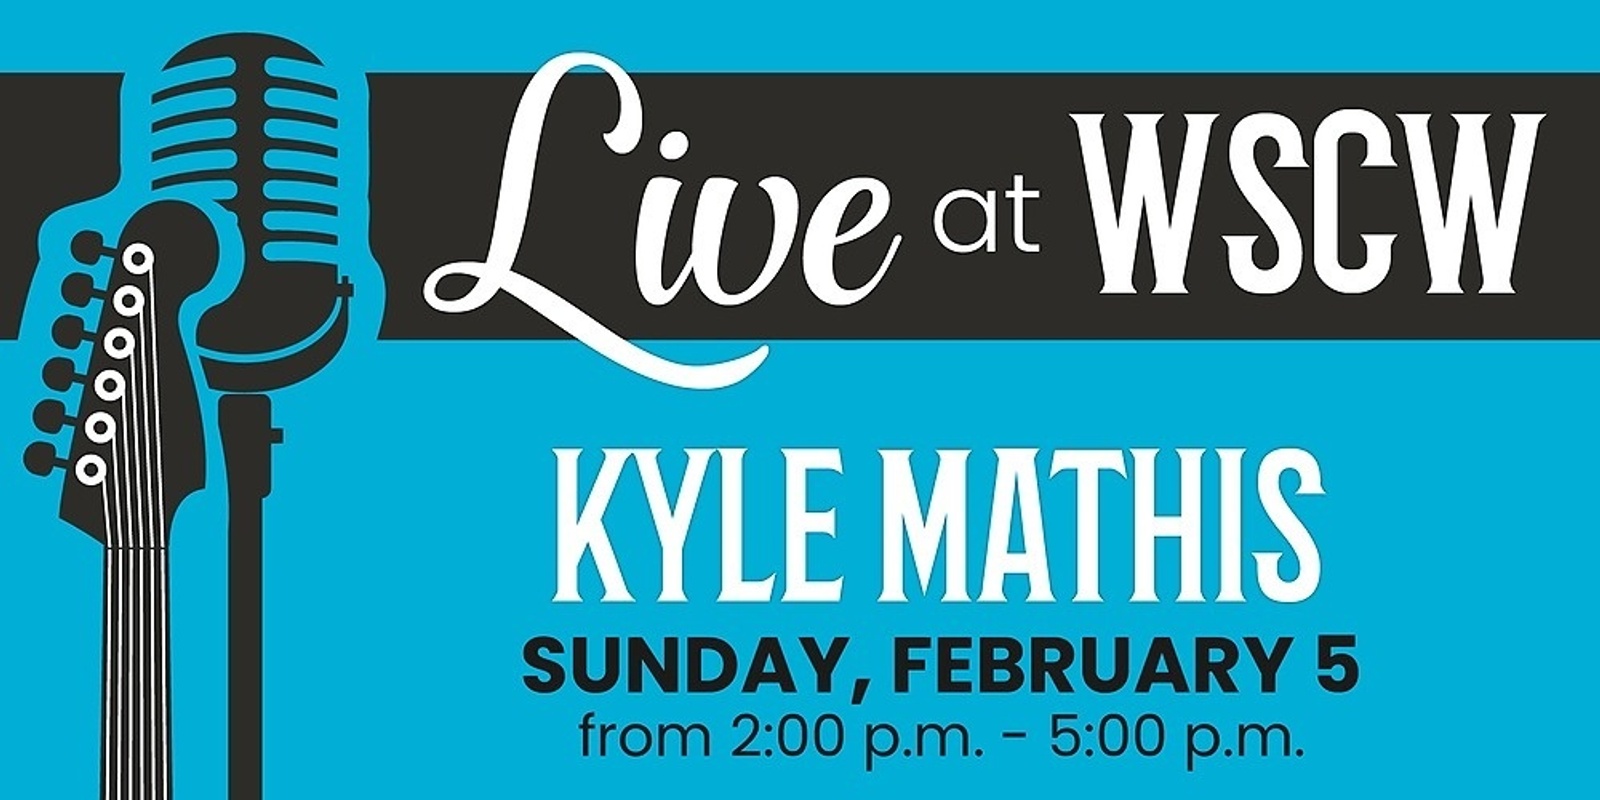 Banner image for Kyle Mathis Live at WSCW February 5